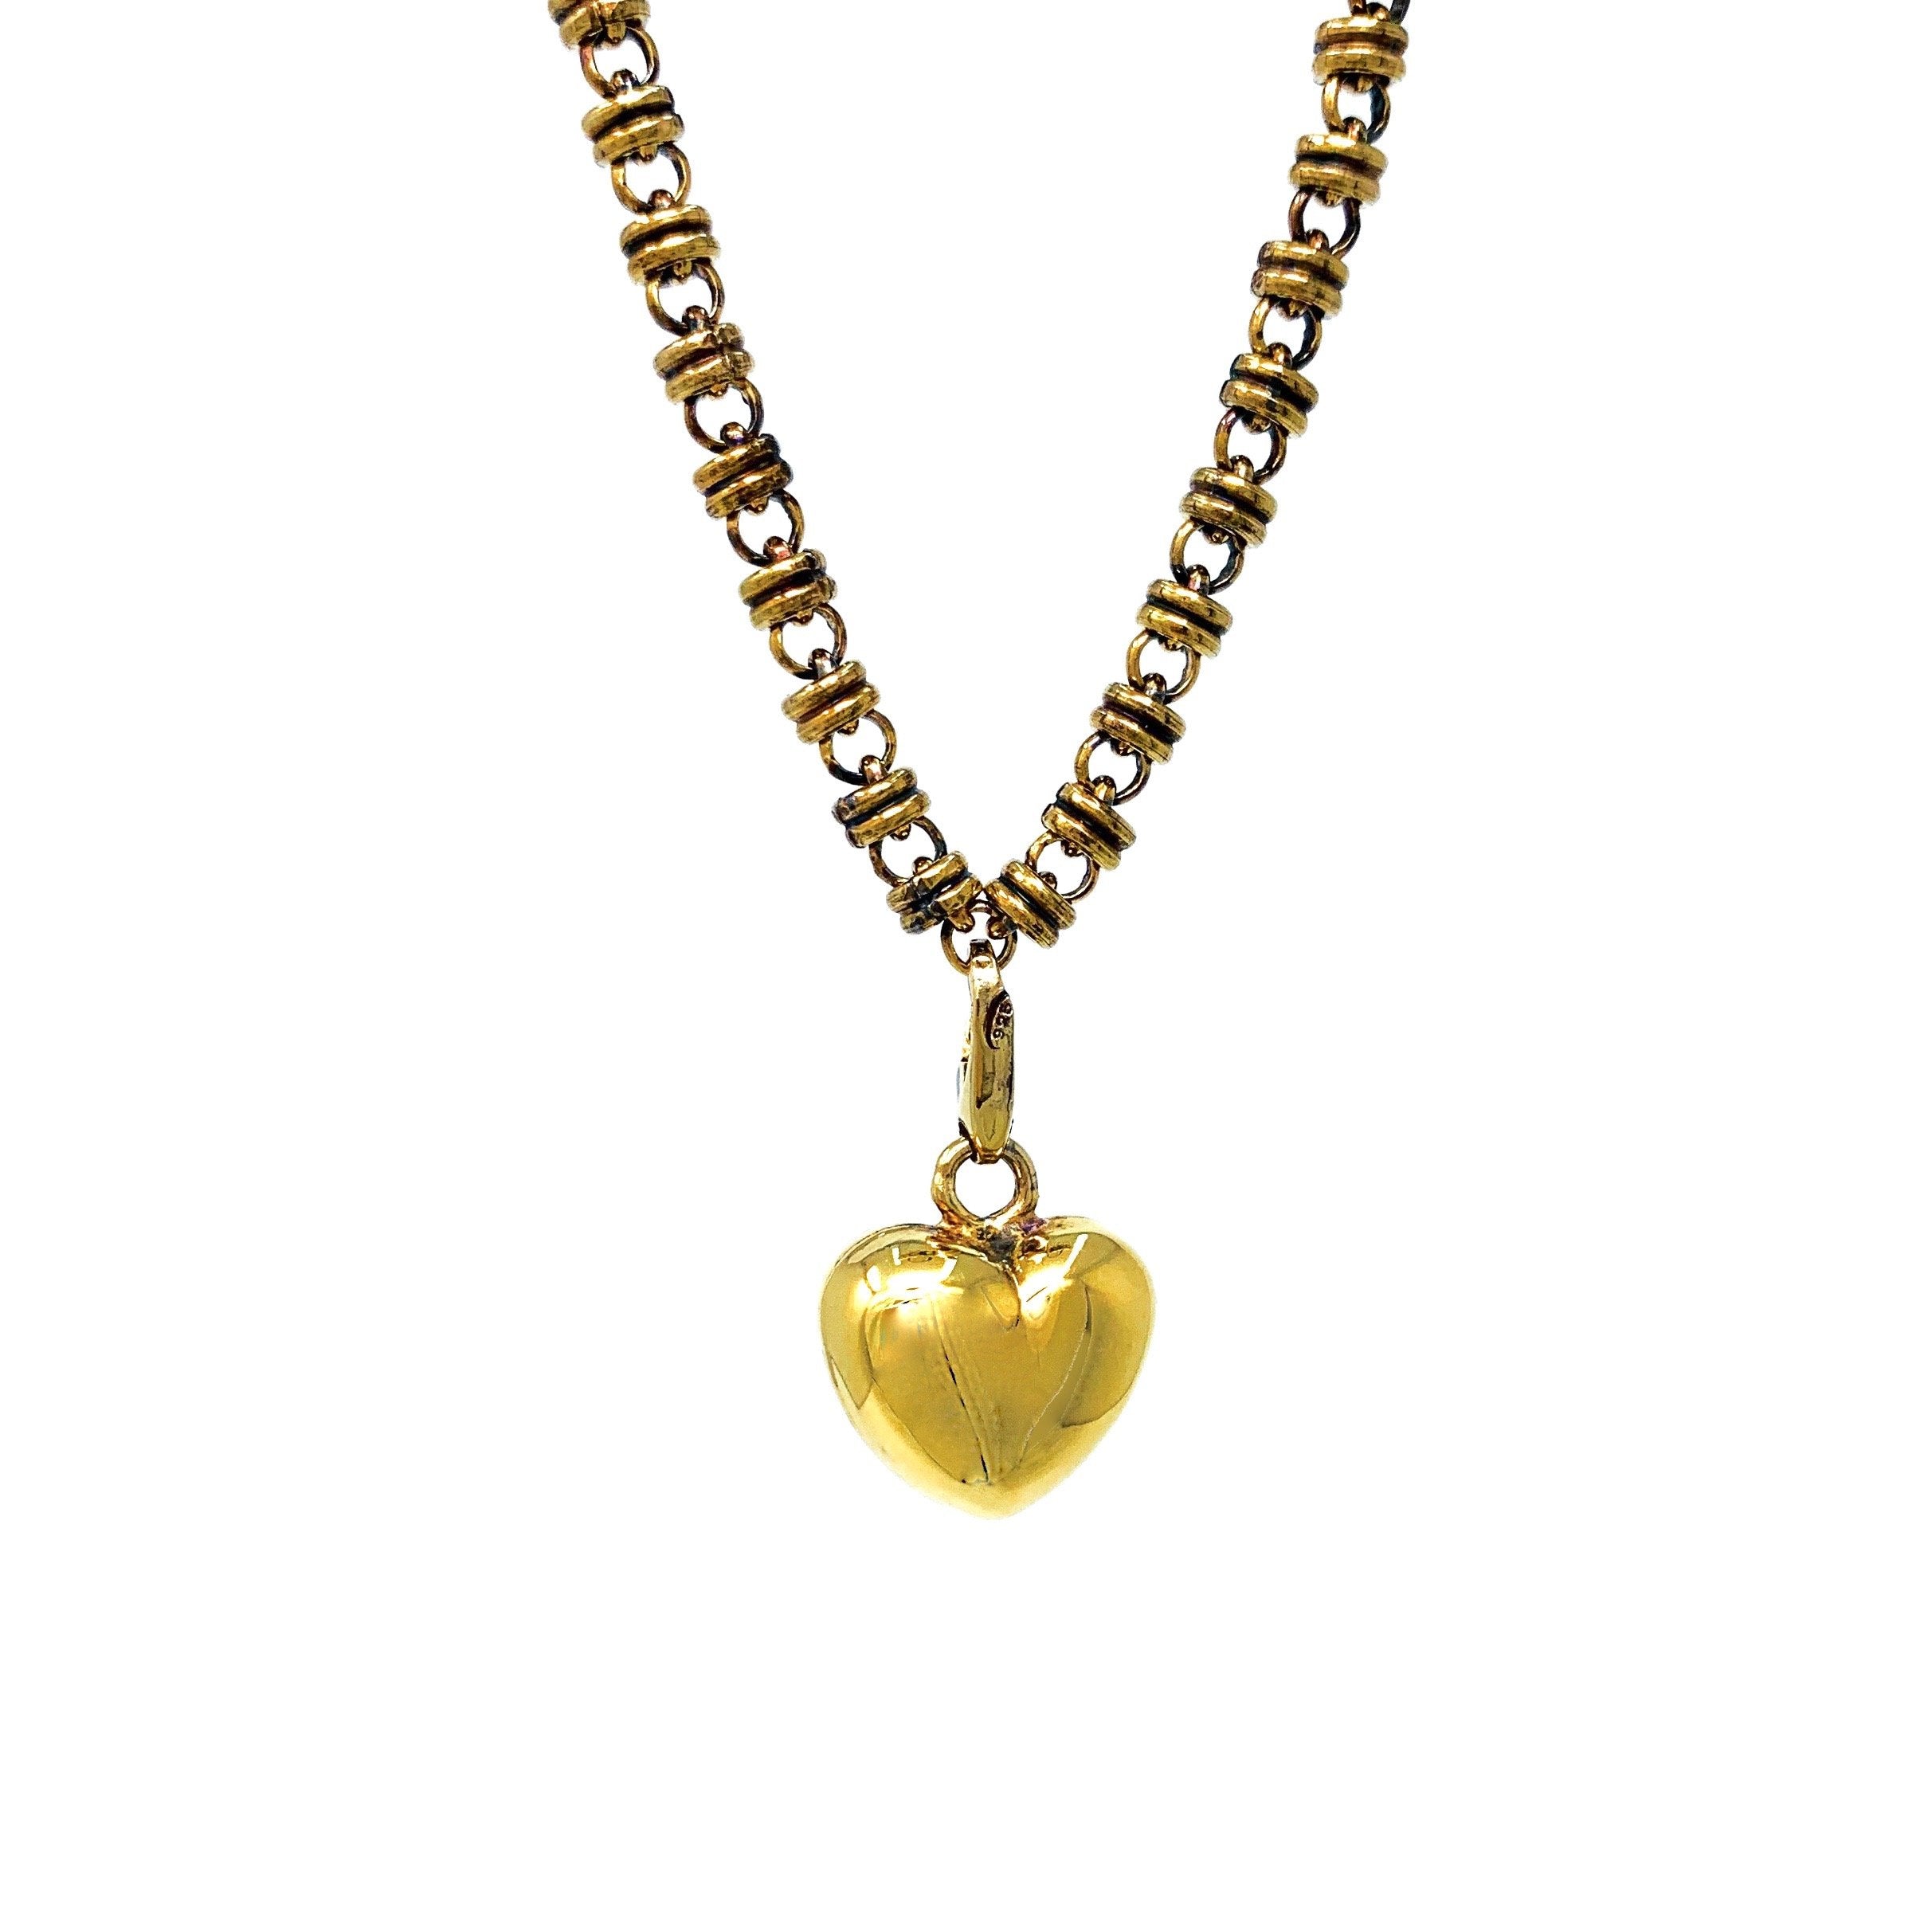 Puffed Heart Charm in Gold